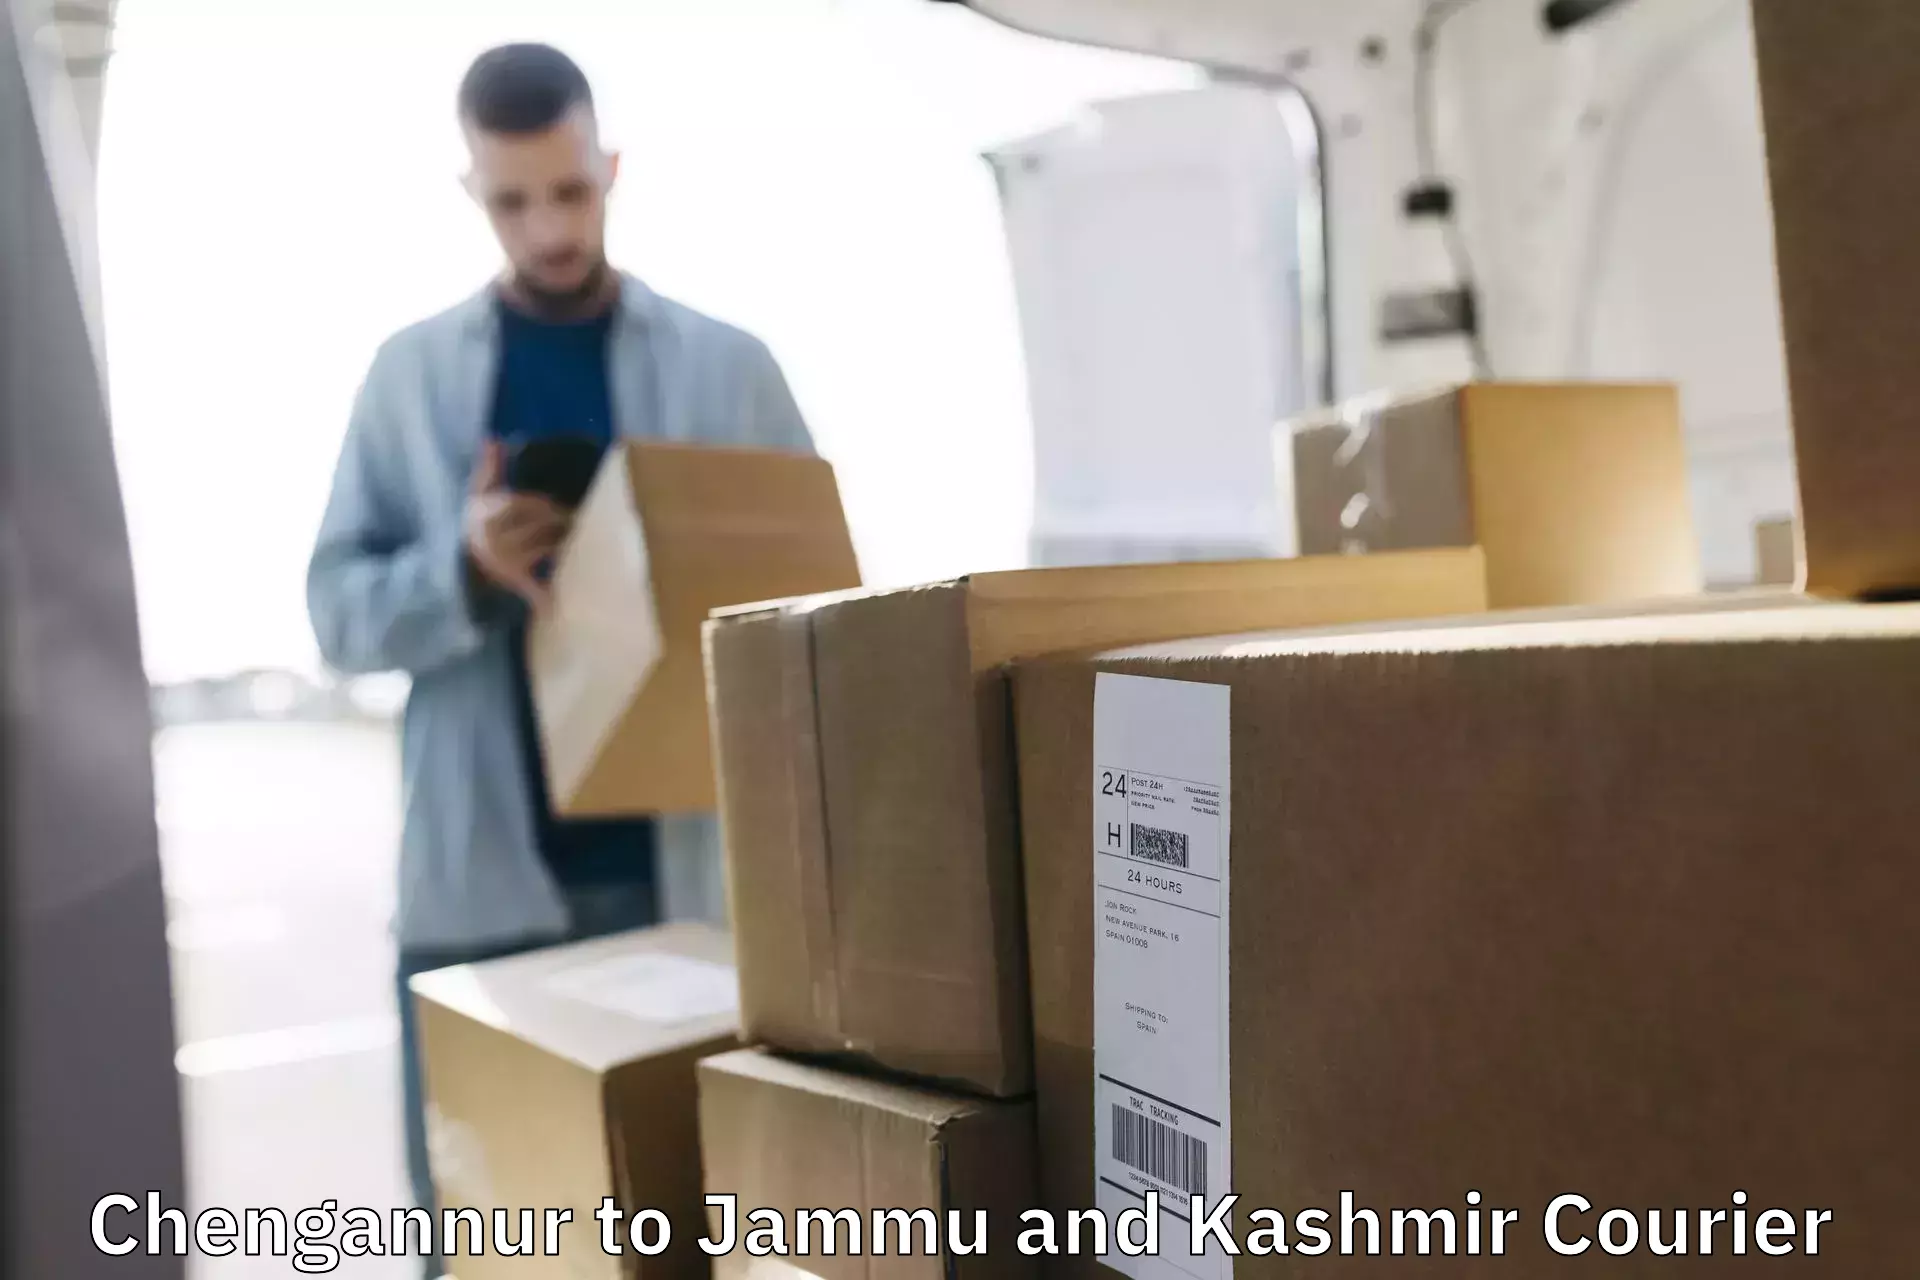 Reliable parcel services Chengannur to Kupwara